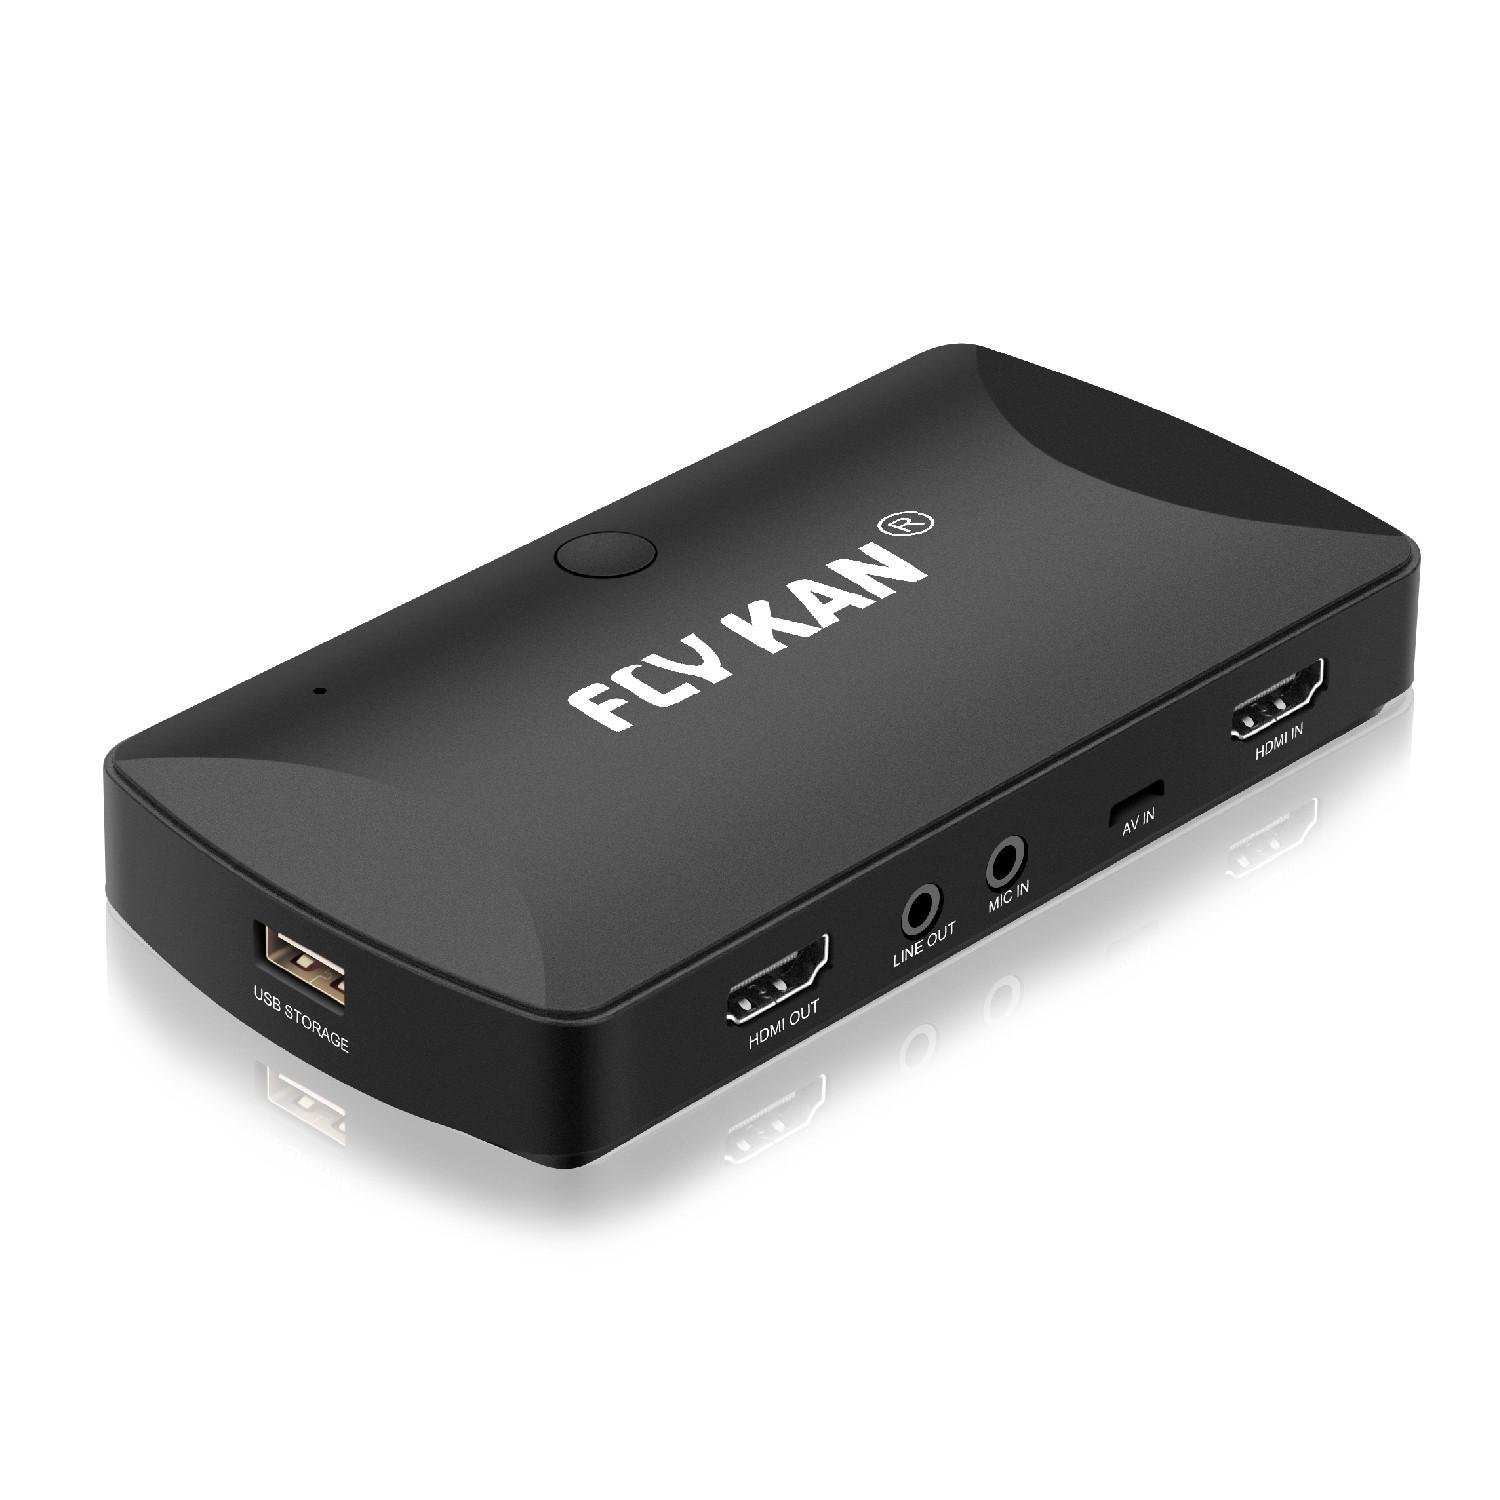 Fly Kan Standalone HD Video Capture Box (HDMI,Composite,Component)